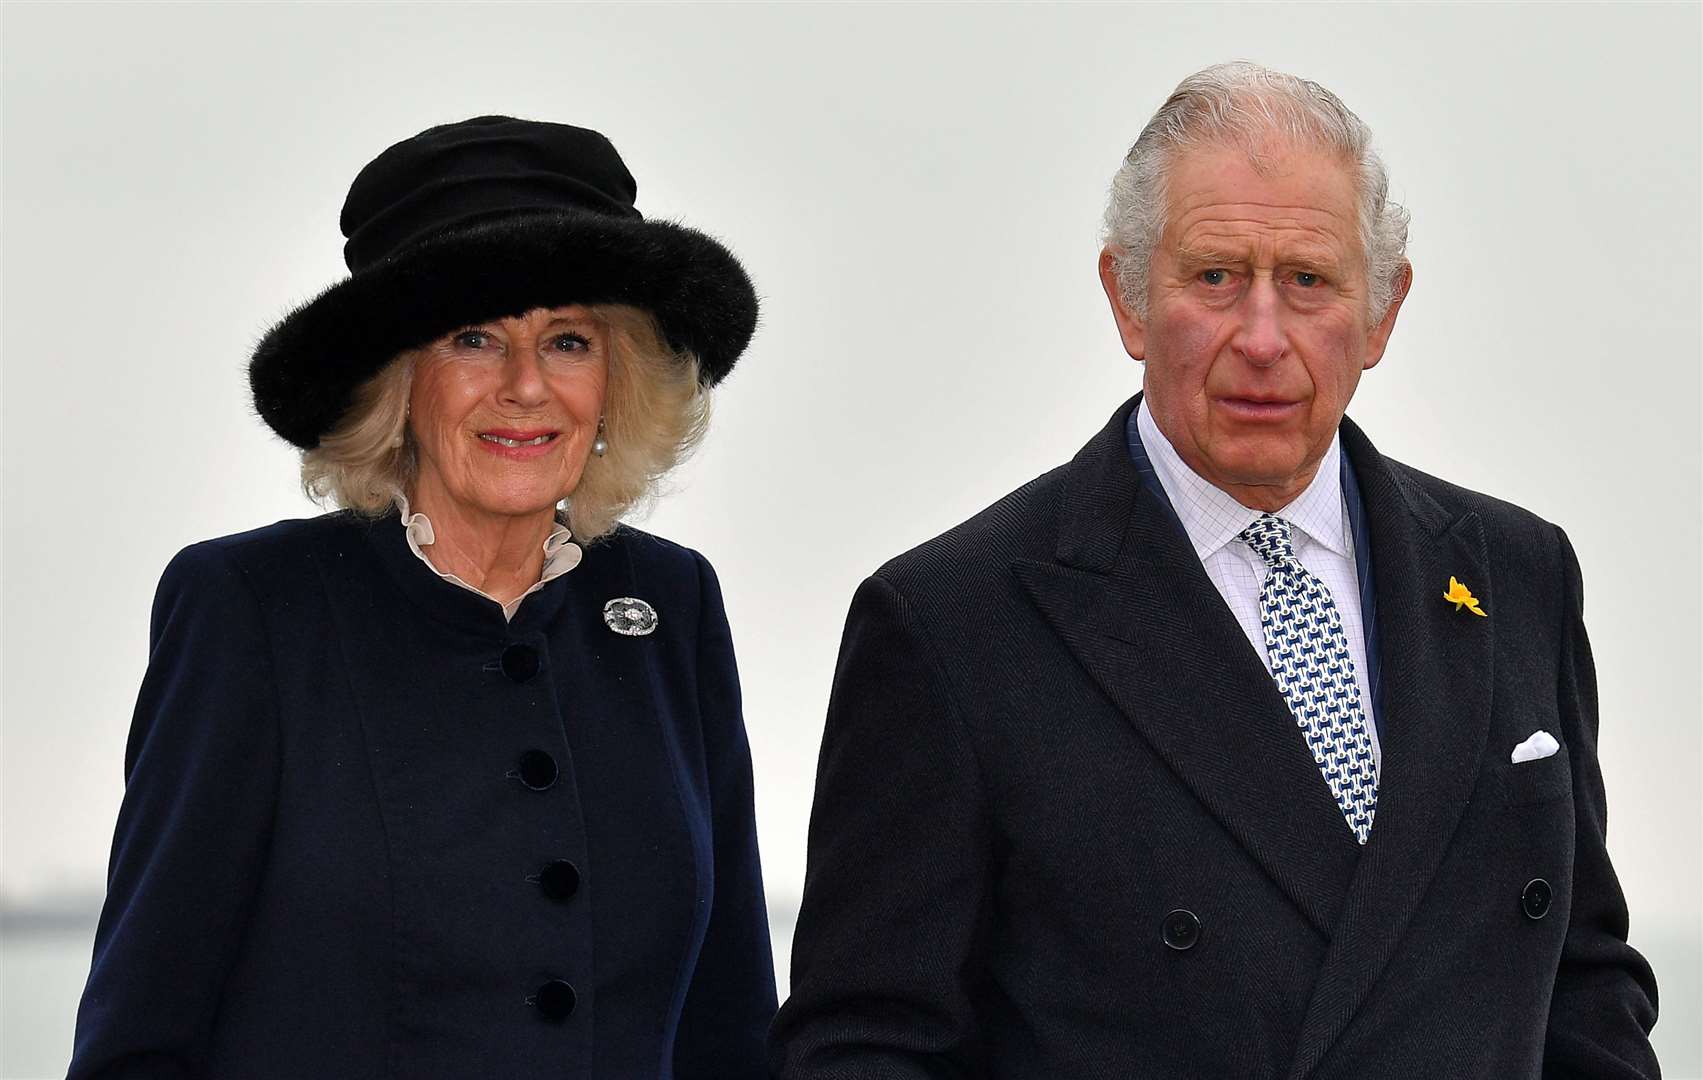 Charles to represent the Queen at Royal Maundy Service for first time